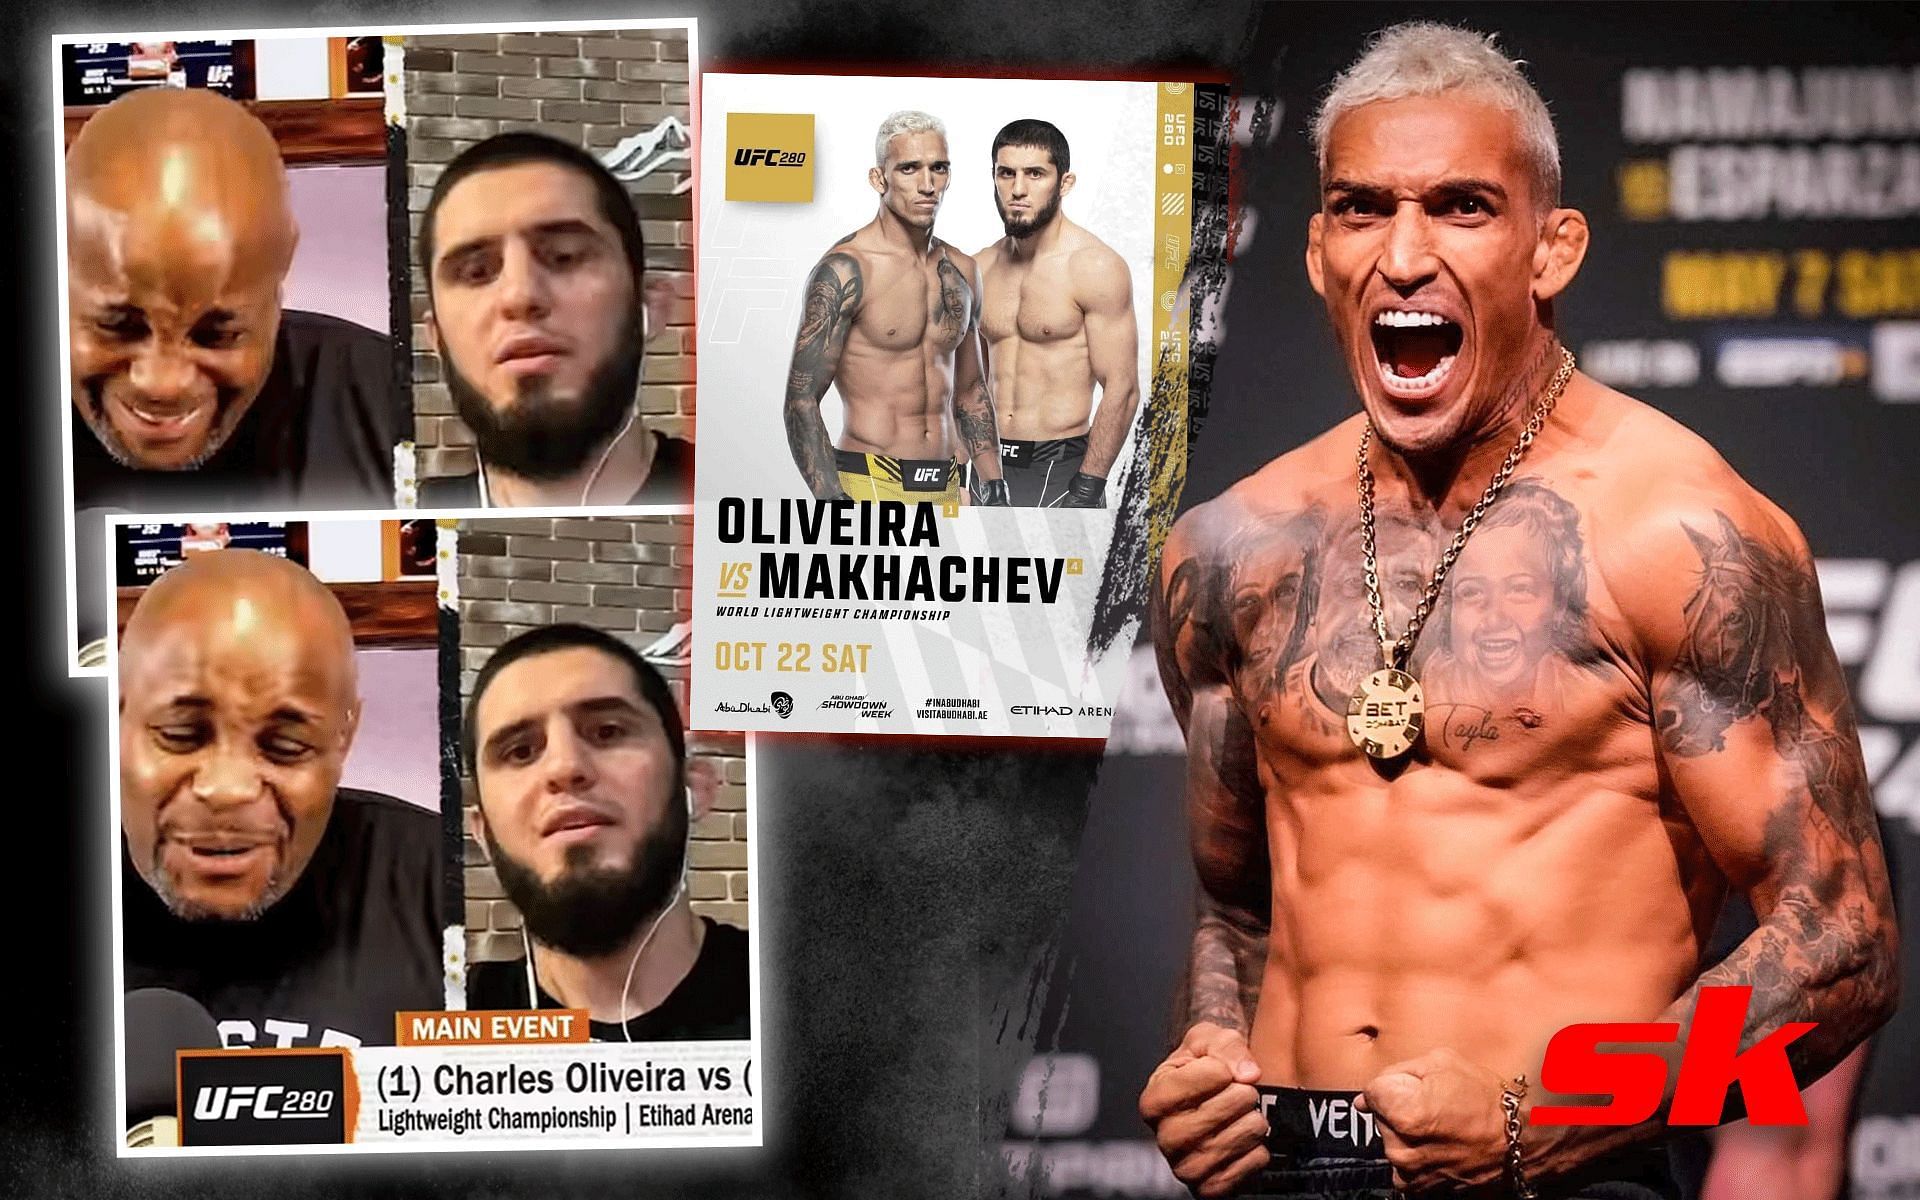 Fans seem miffed with Daniel Cormier&#039;s reaction to Islam Makhachev trolling Charles Oliveira [Oliveira image via @charlesdobronx on Instagram | UFC 280 poster via @ufc on Instagram | other images via @espnmma on Instagram]